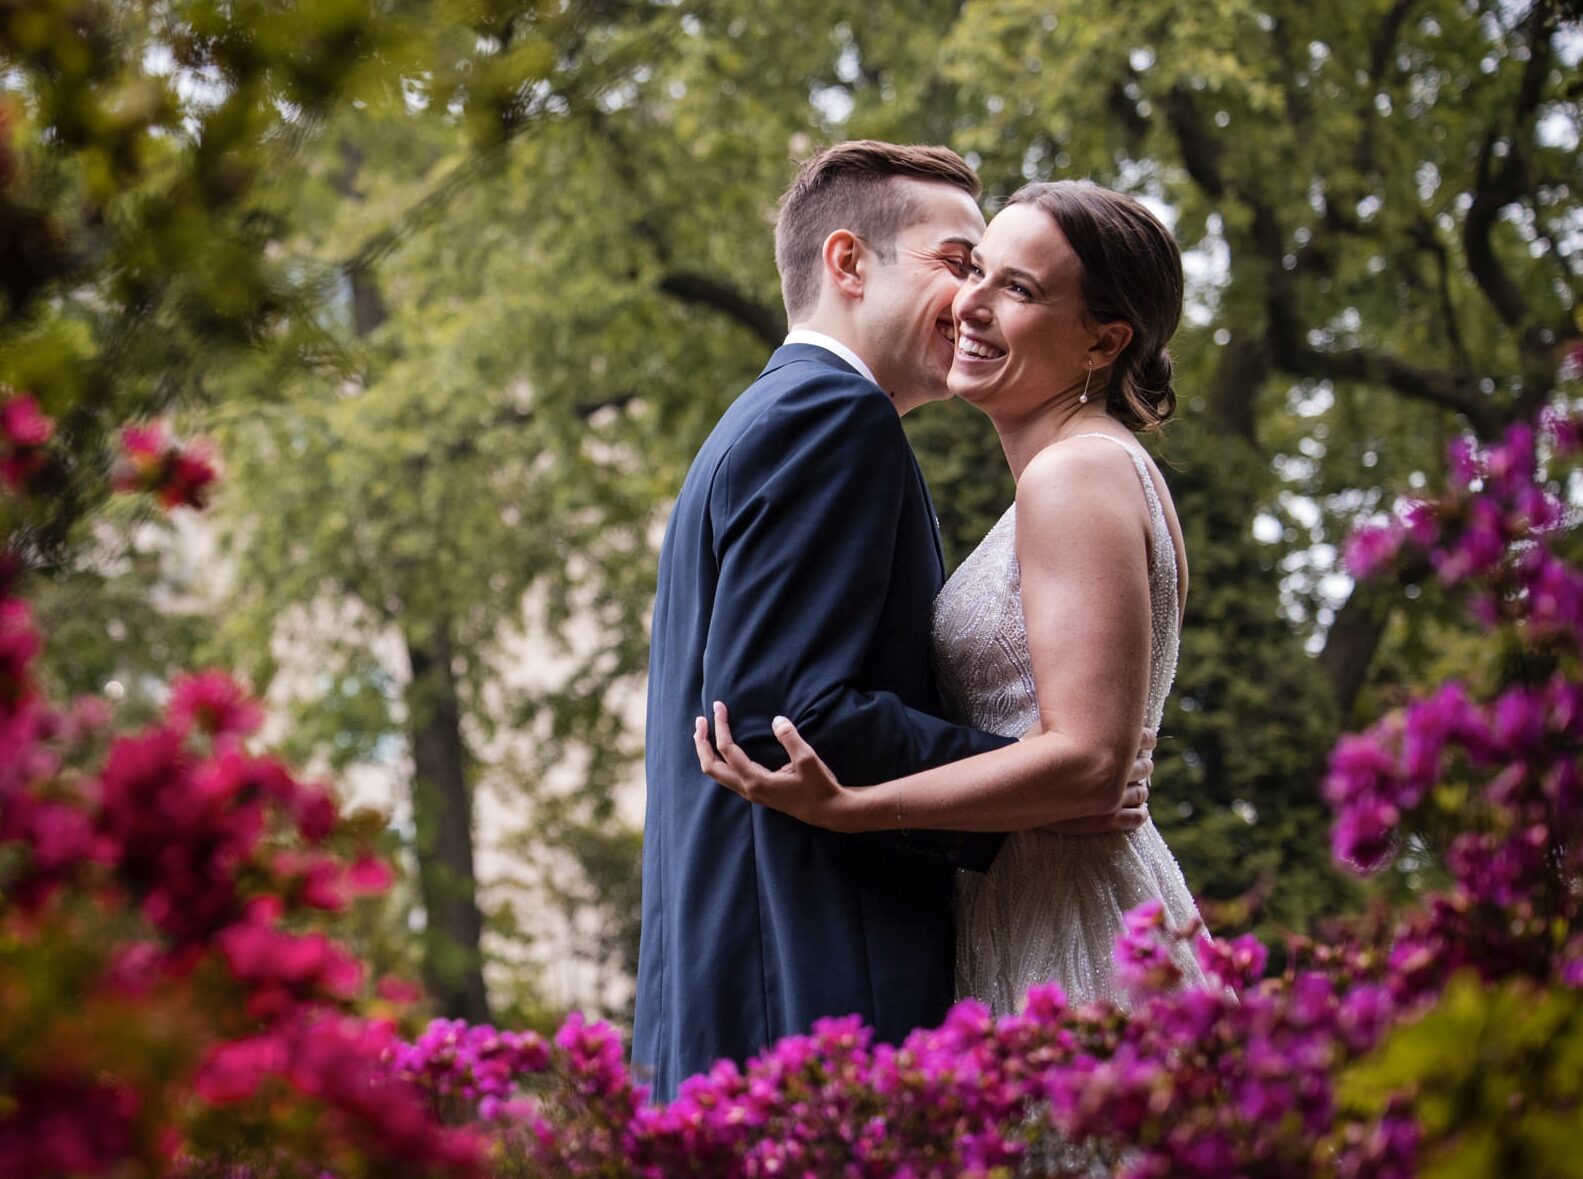 A bride and groom embrace in front of flowers at their Brooklyn Botanic Garden wedding.